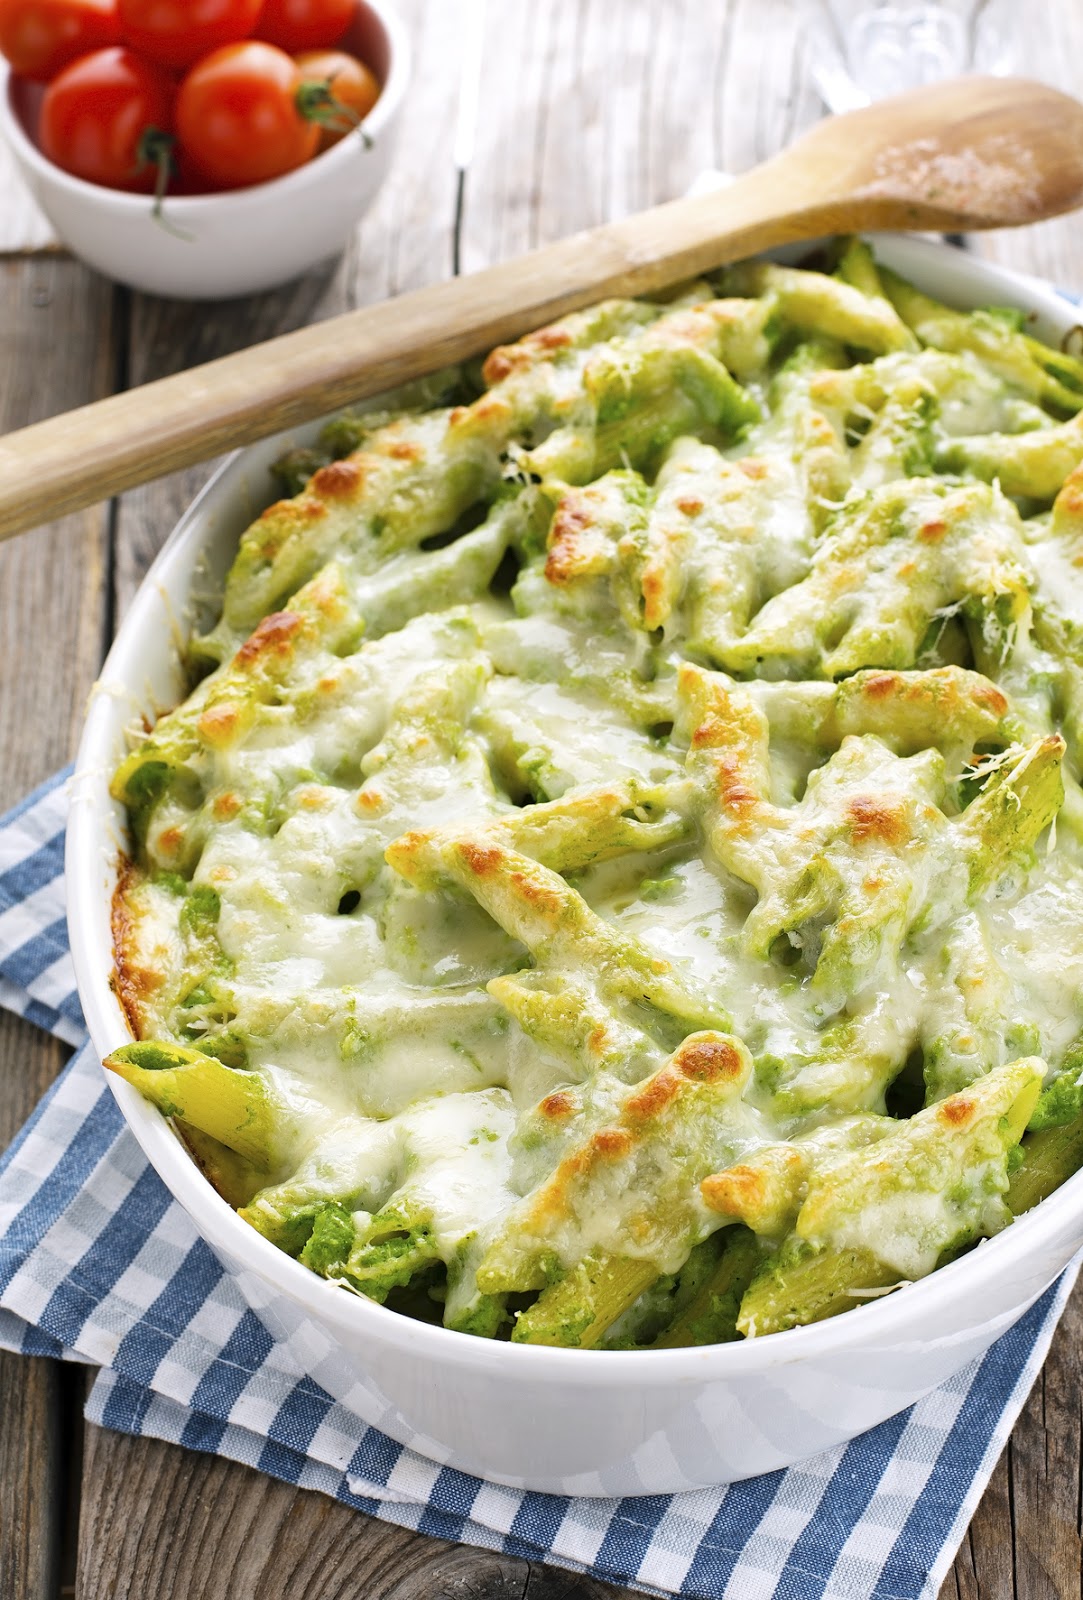 Creamy Baked Ziti with Broccoli and Provolone